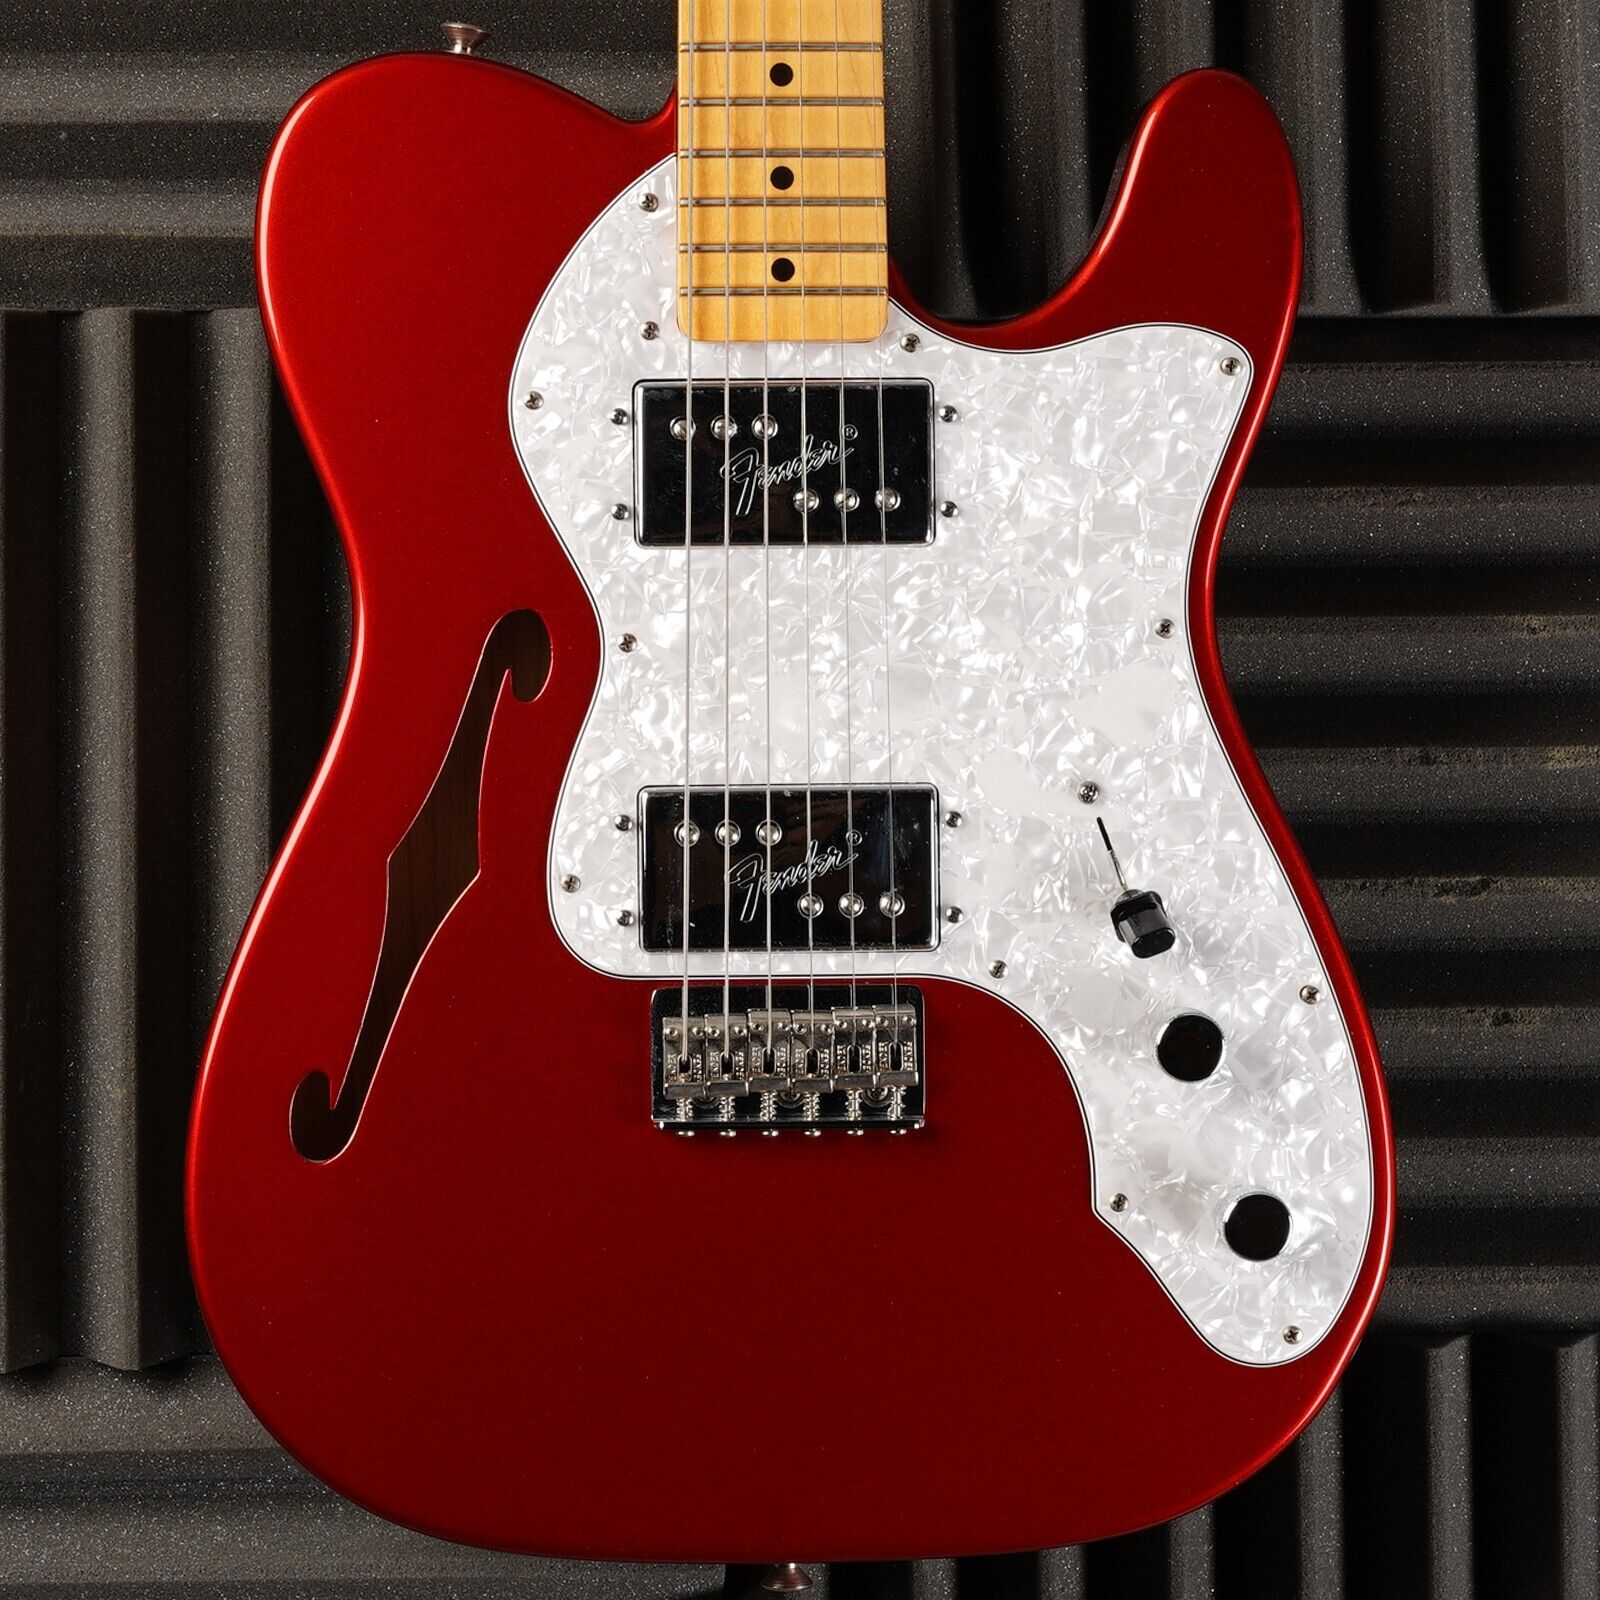 Fender American Vintage '72 Telecaster Thinline 2011 - Candy Apple Red